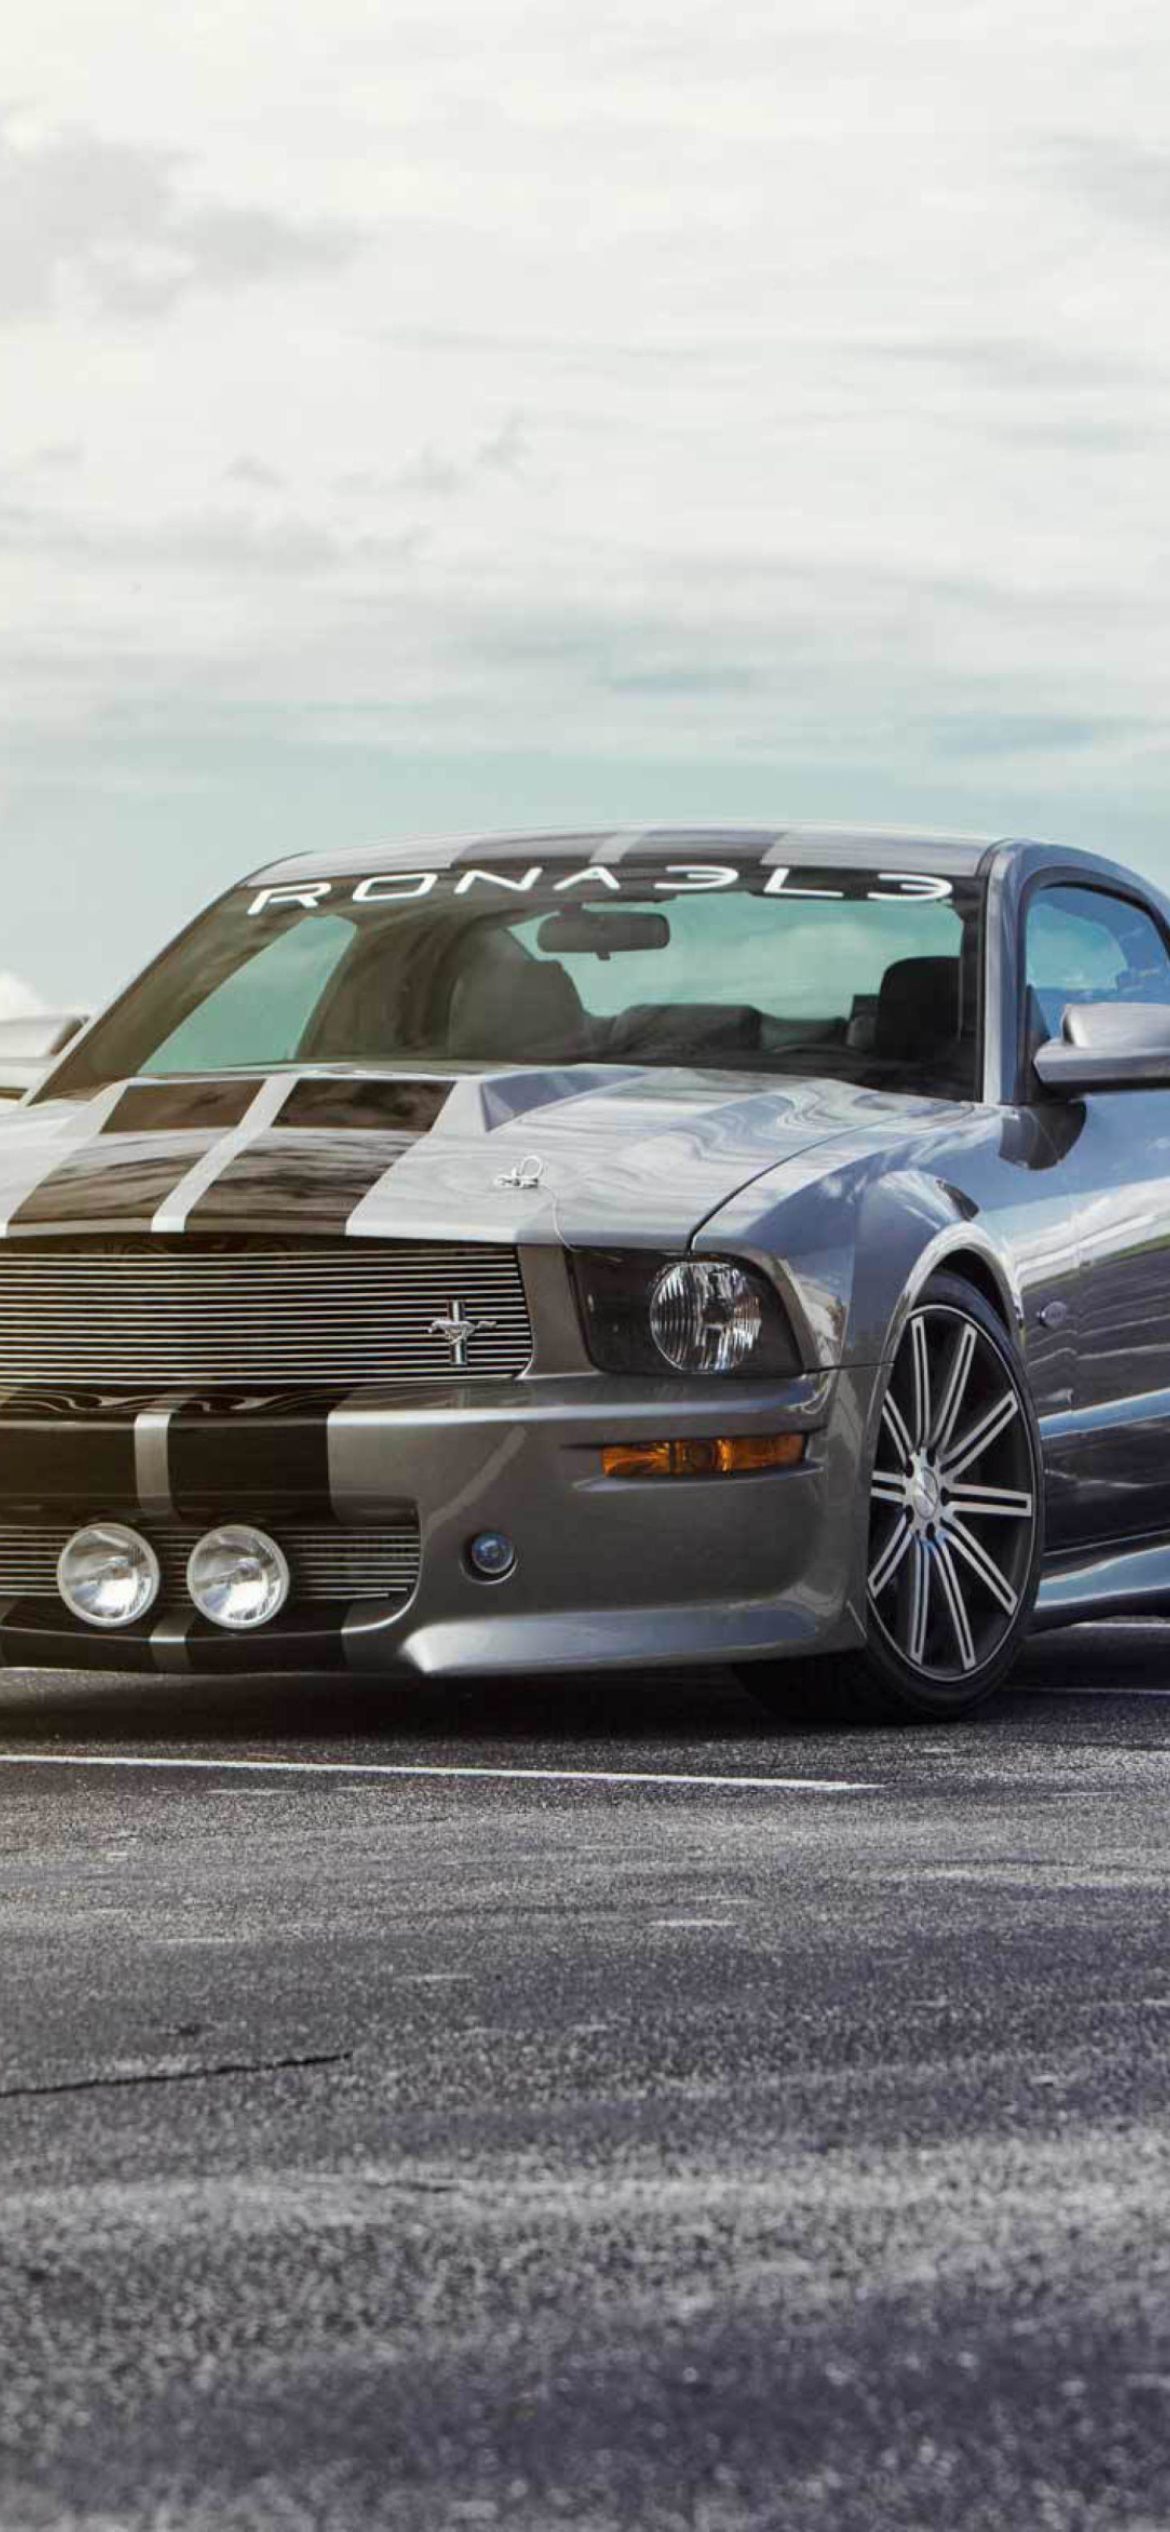 Silver Ford Mustang wallpaper 1170x2532